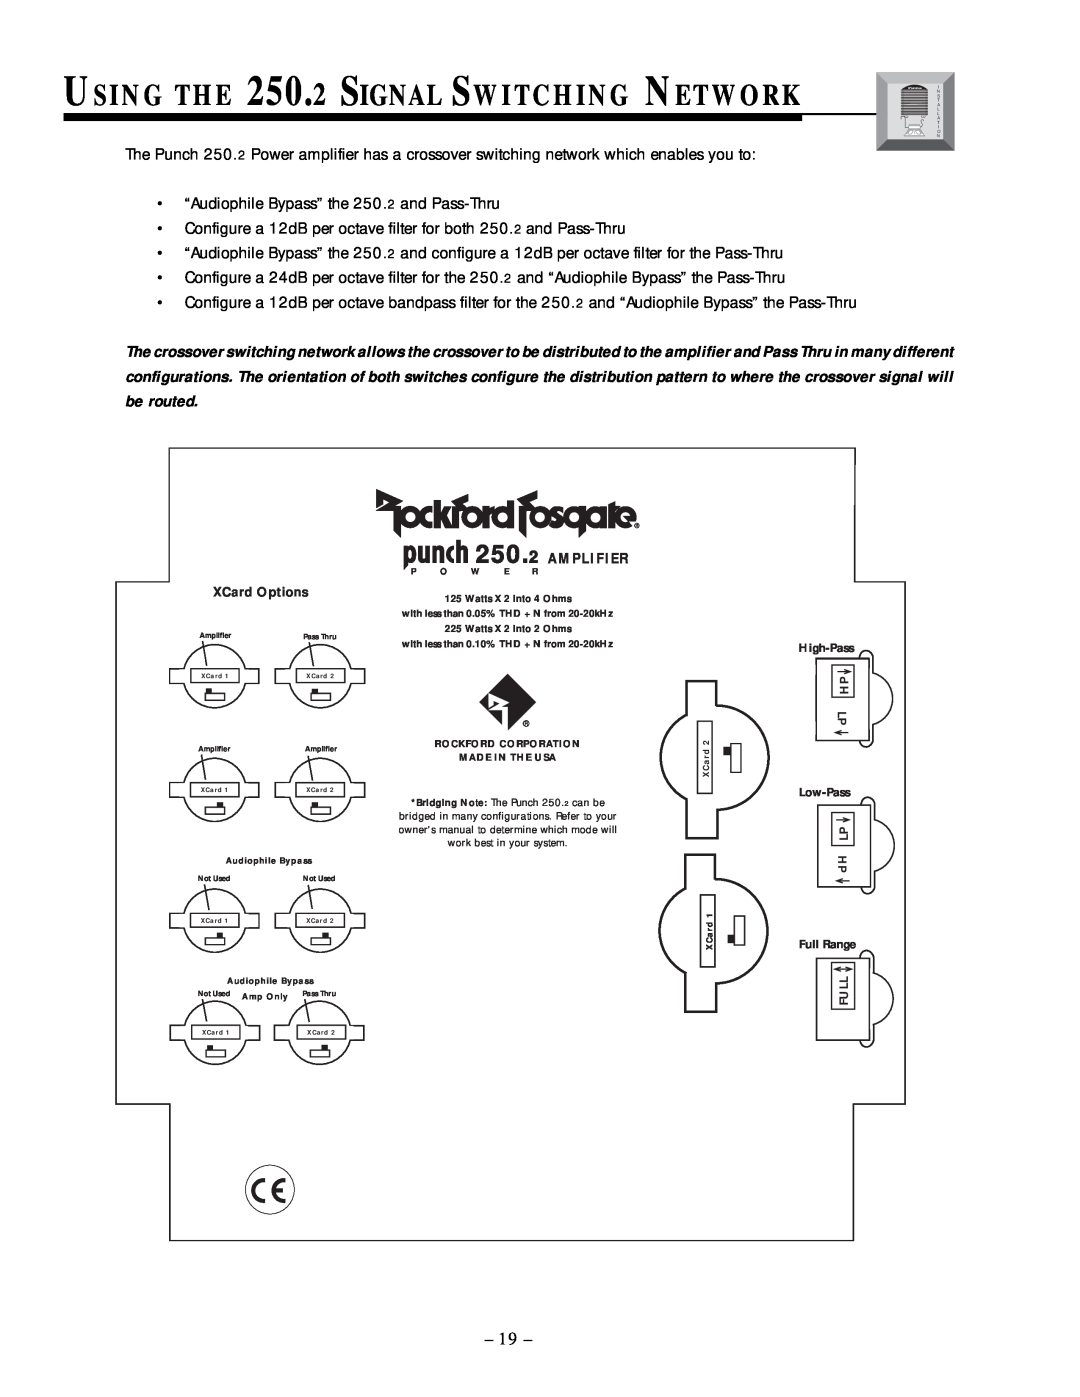 Rockford Fosgate manual USING THE 250.2 SIGNAL SWITCHING NETWORK 